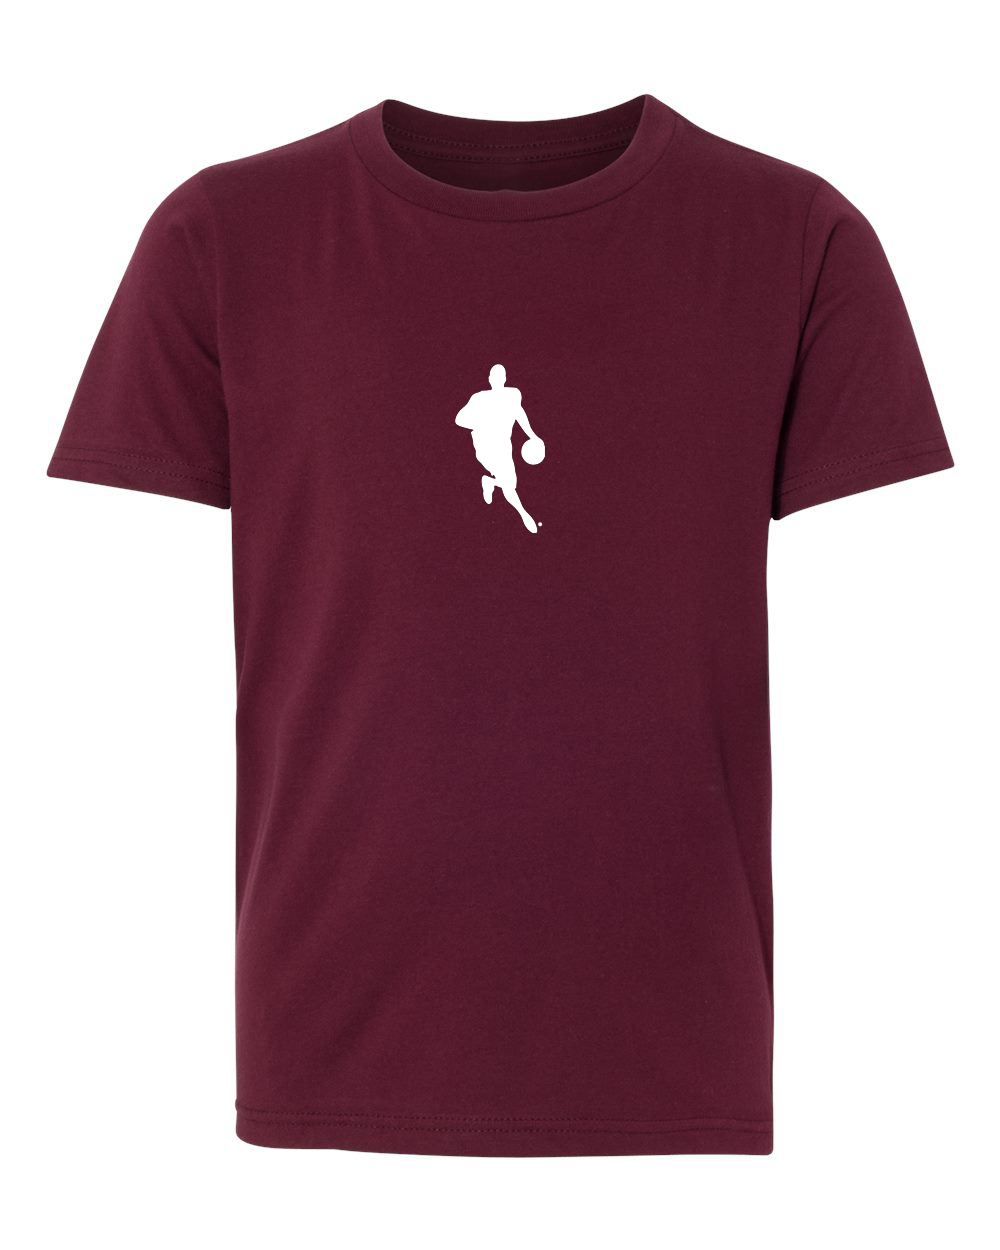 MAROON W.L.A.B. WHITE YOUTH COTTON CREW T-SHIRT